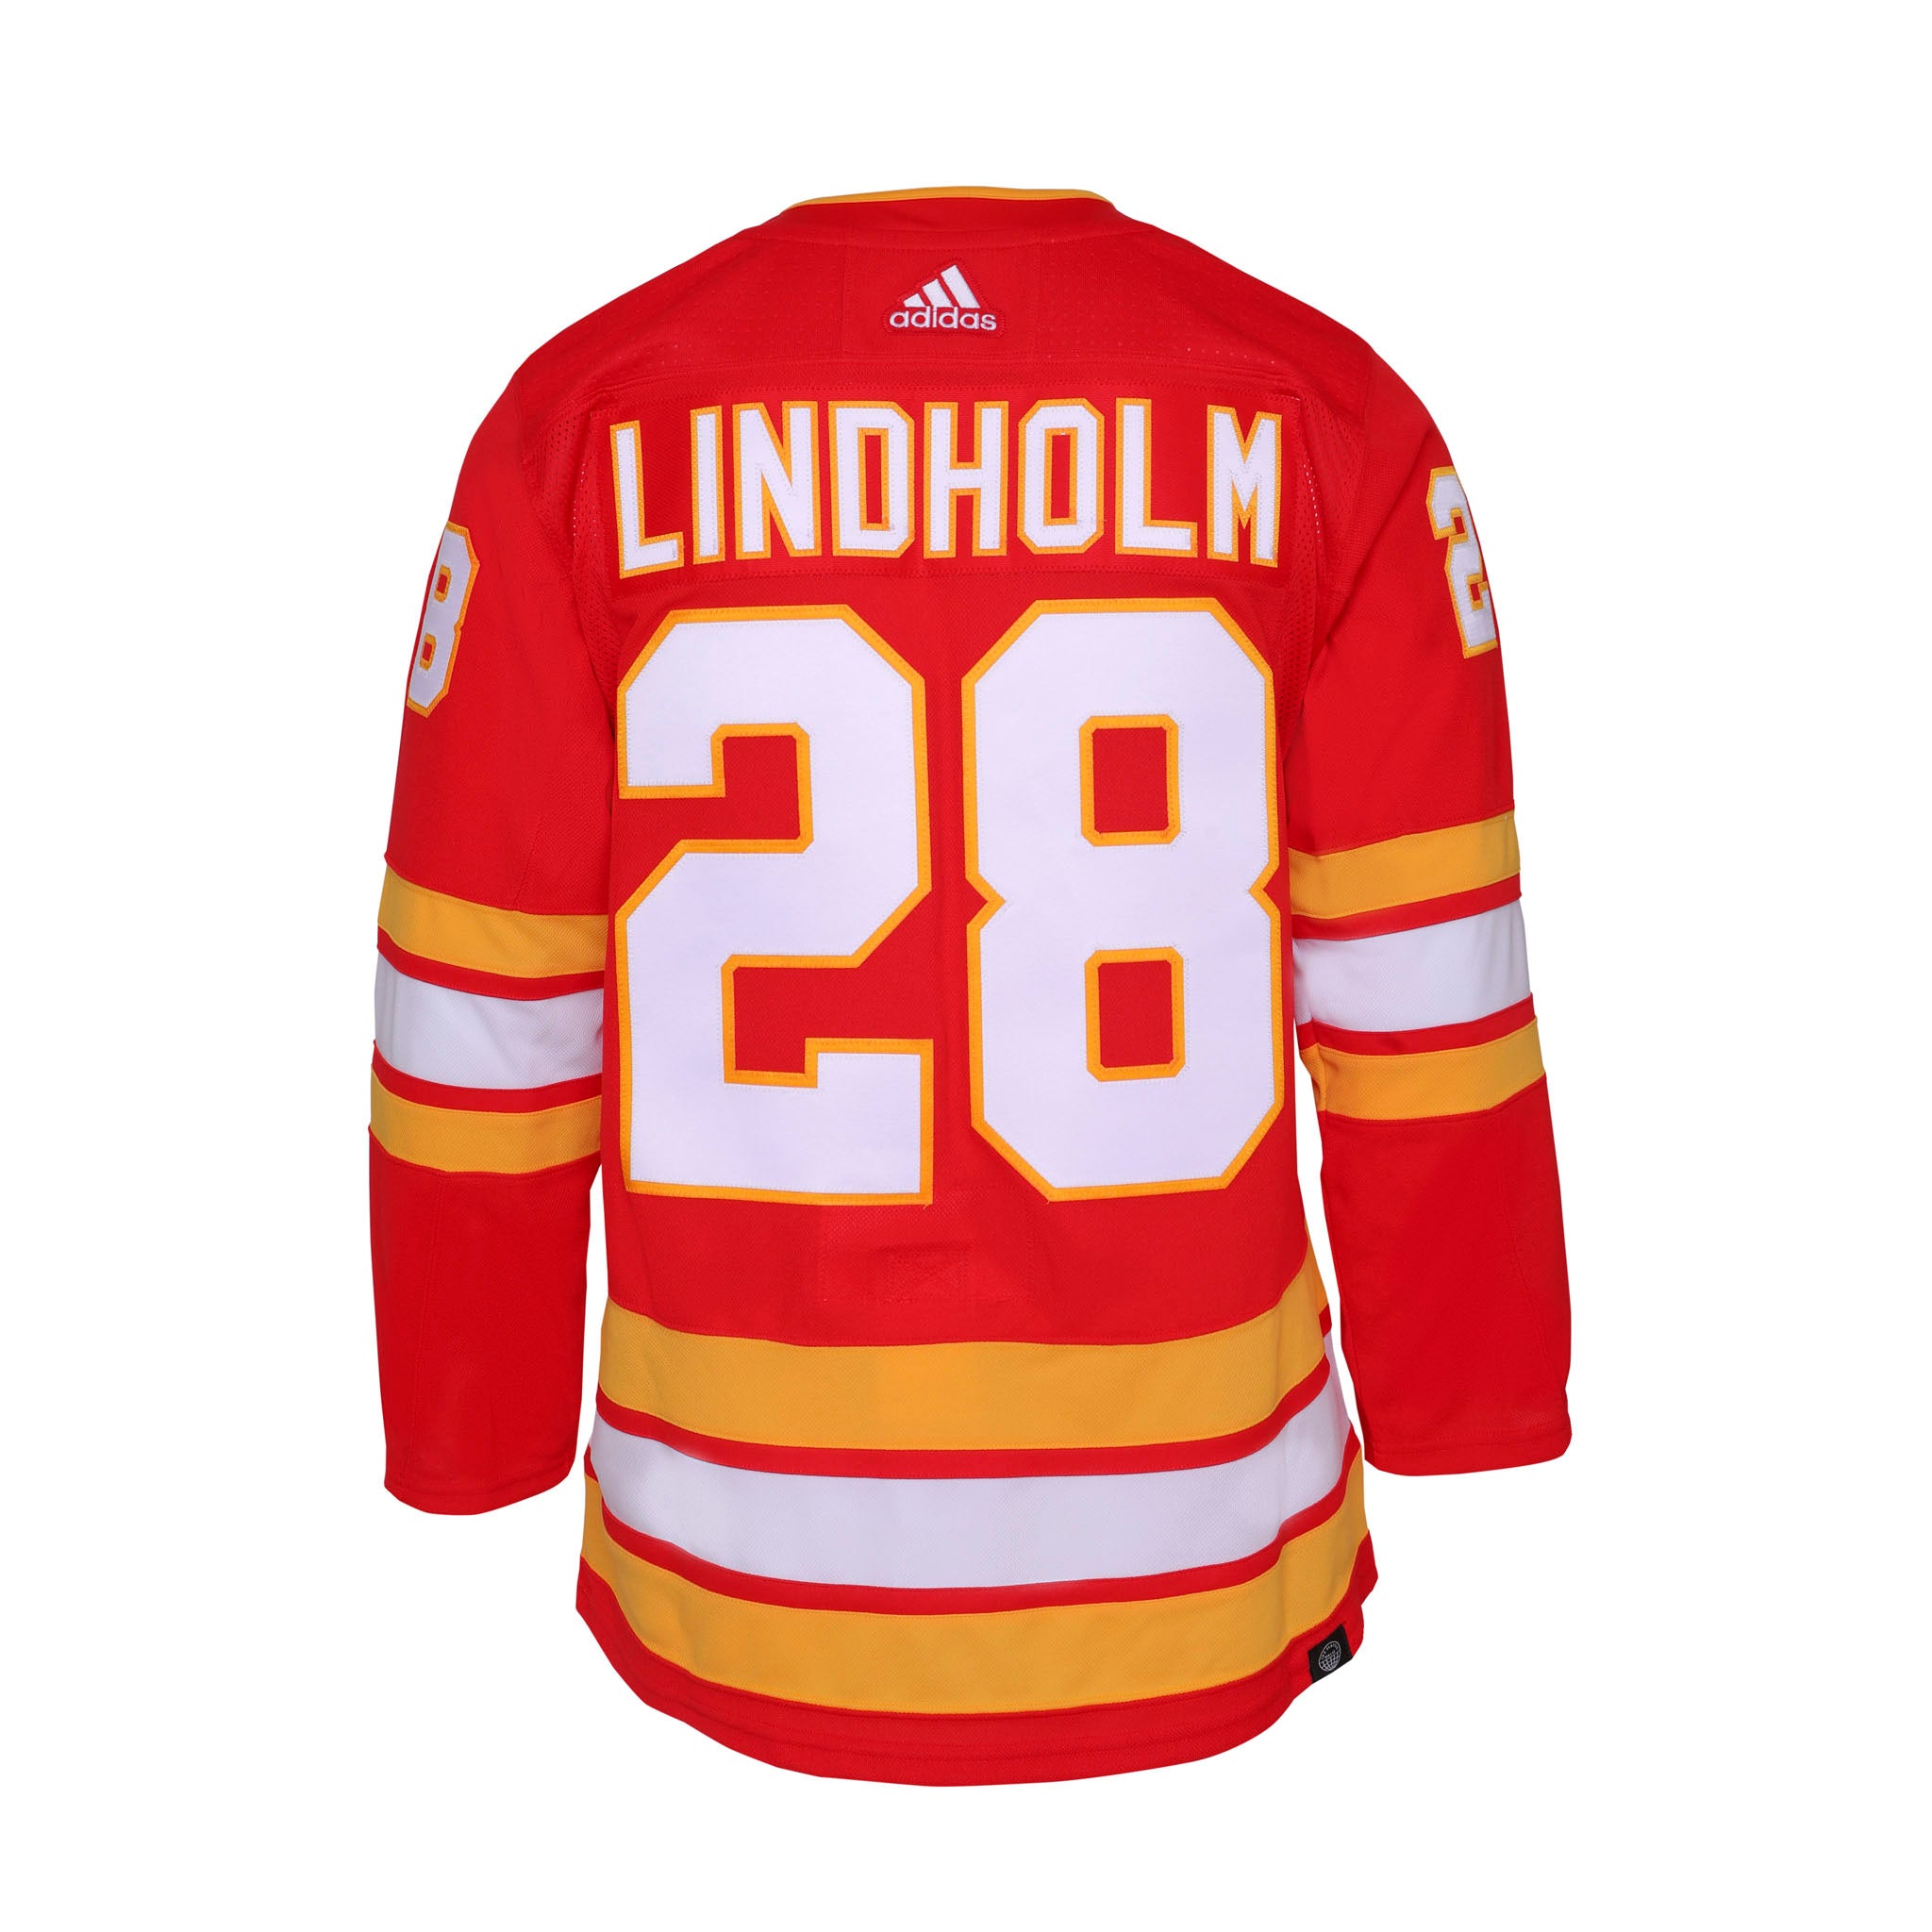 Flames finesse player jersey